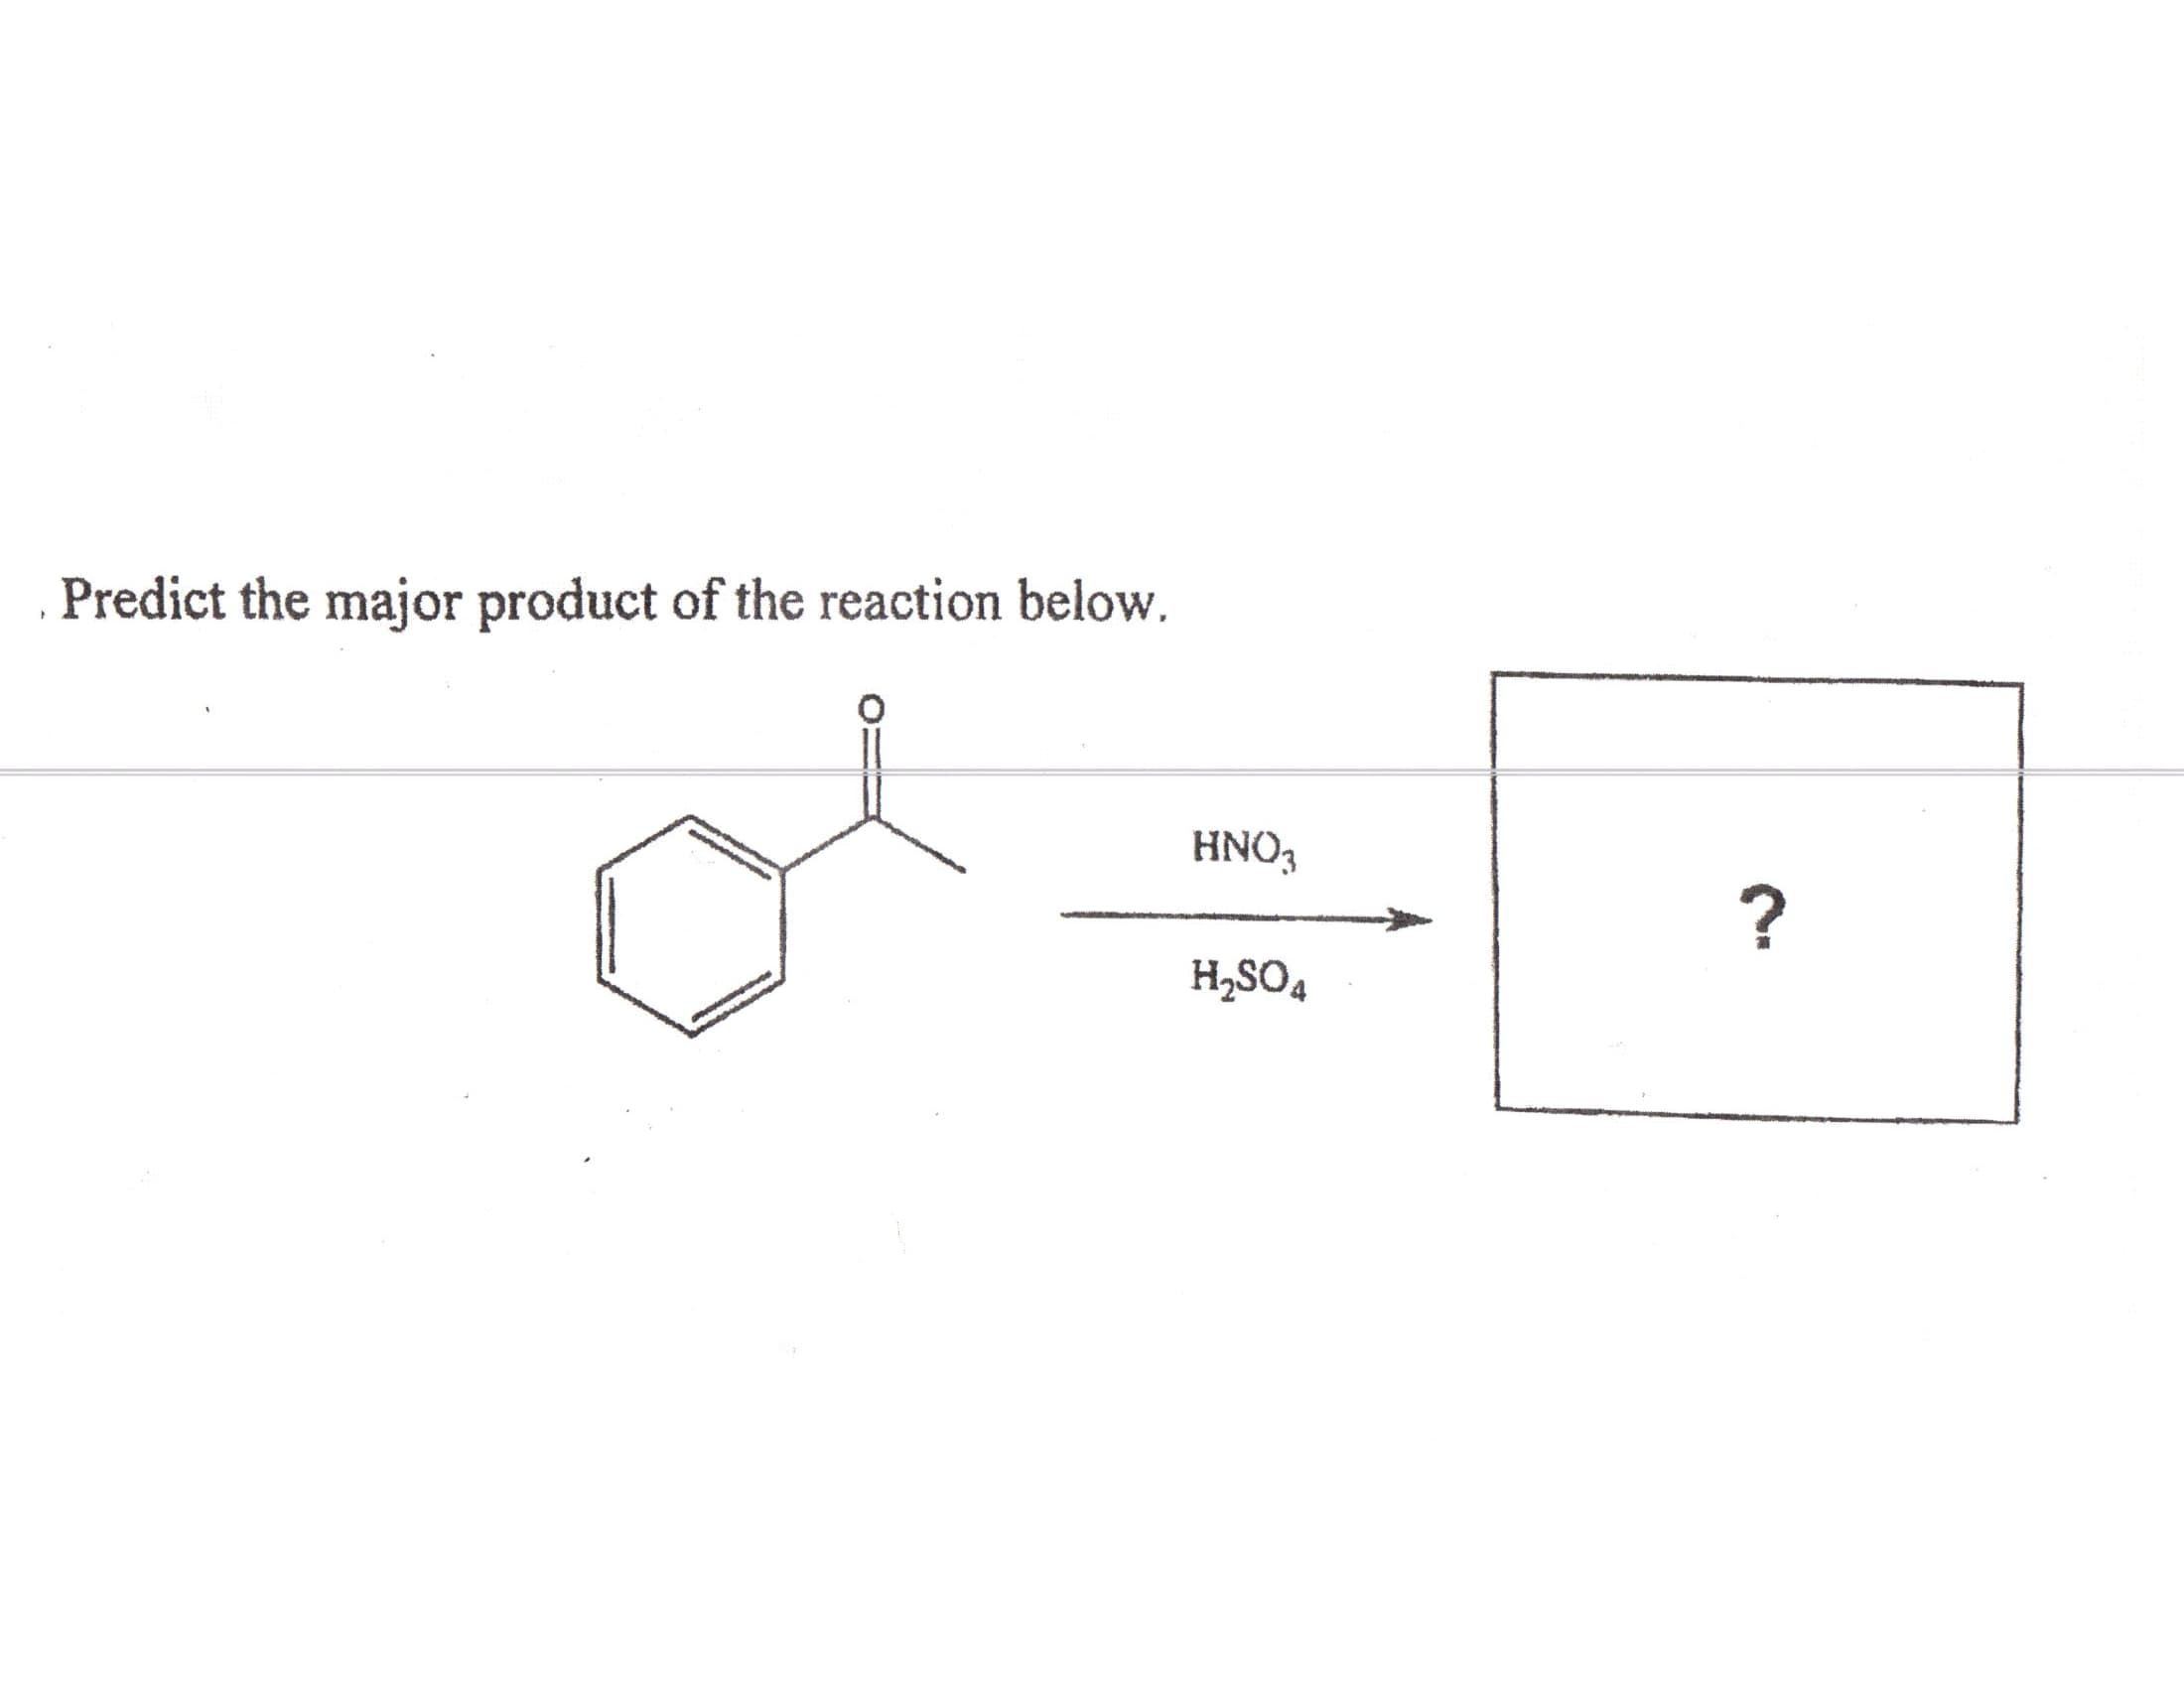 Predict the major product of the reaction below.
HNO,
H,SO4
